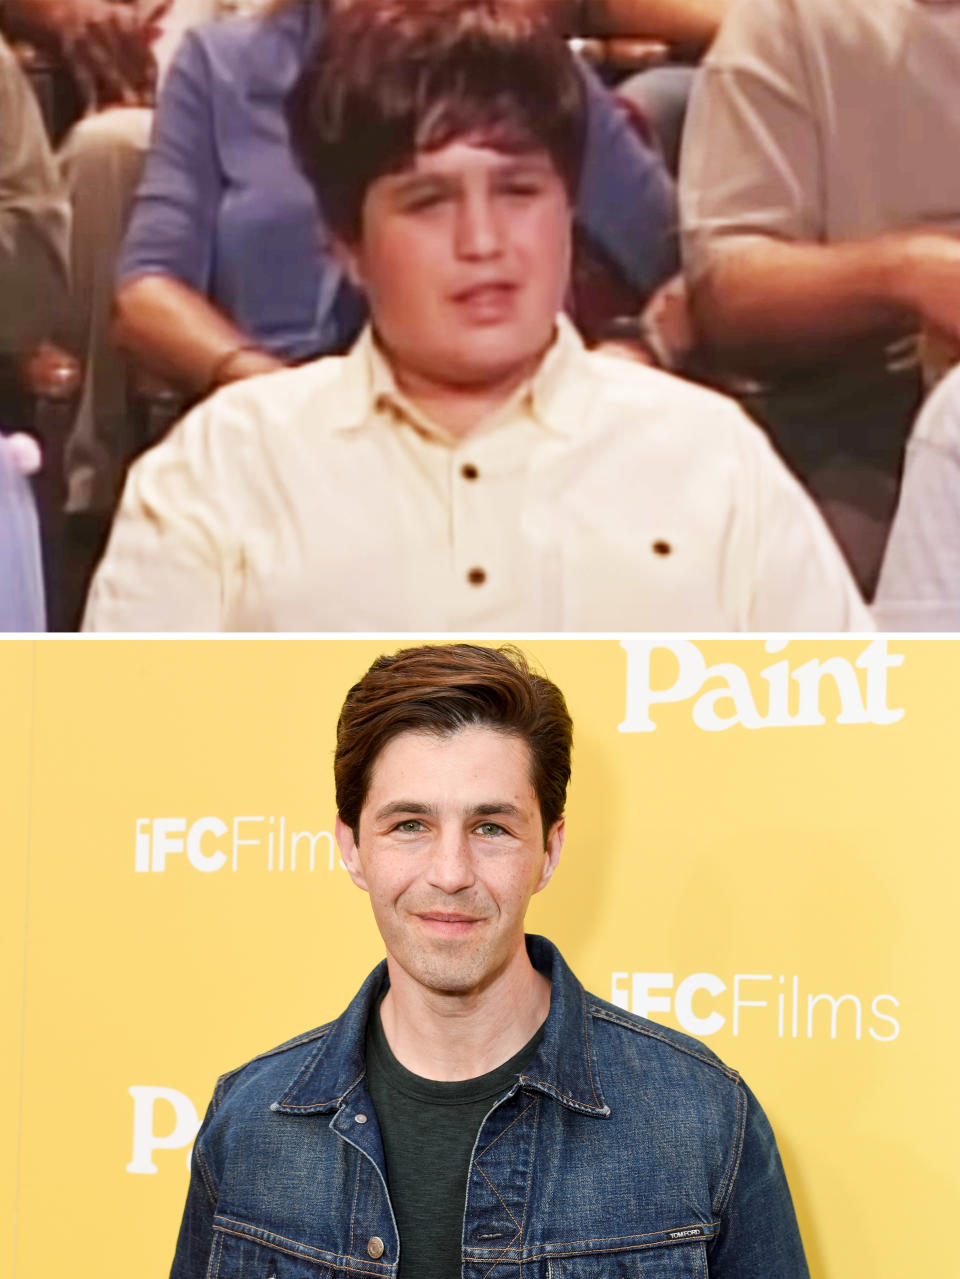 Josh in a scene from the movie and in a close-up at a media event